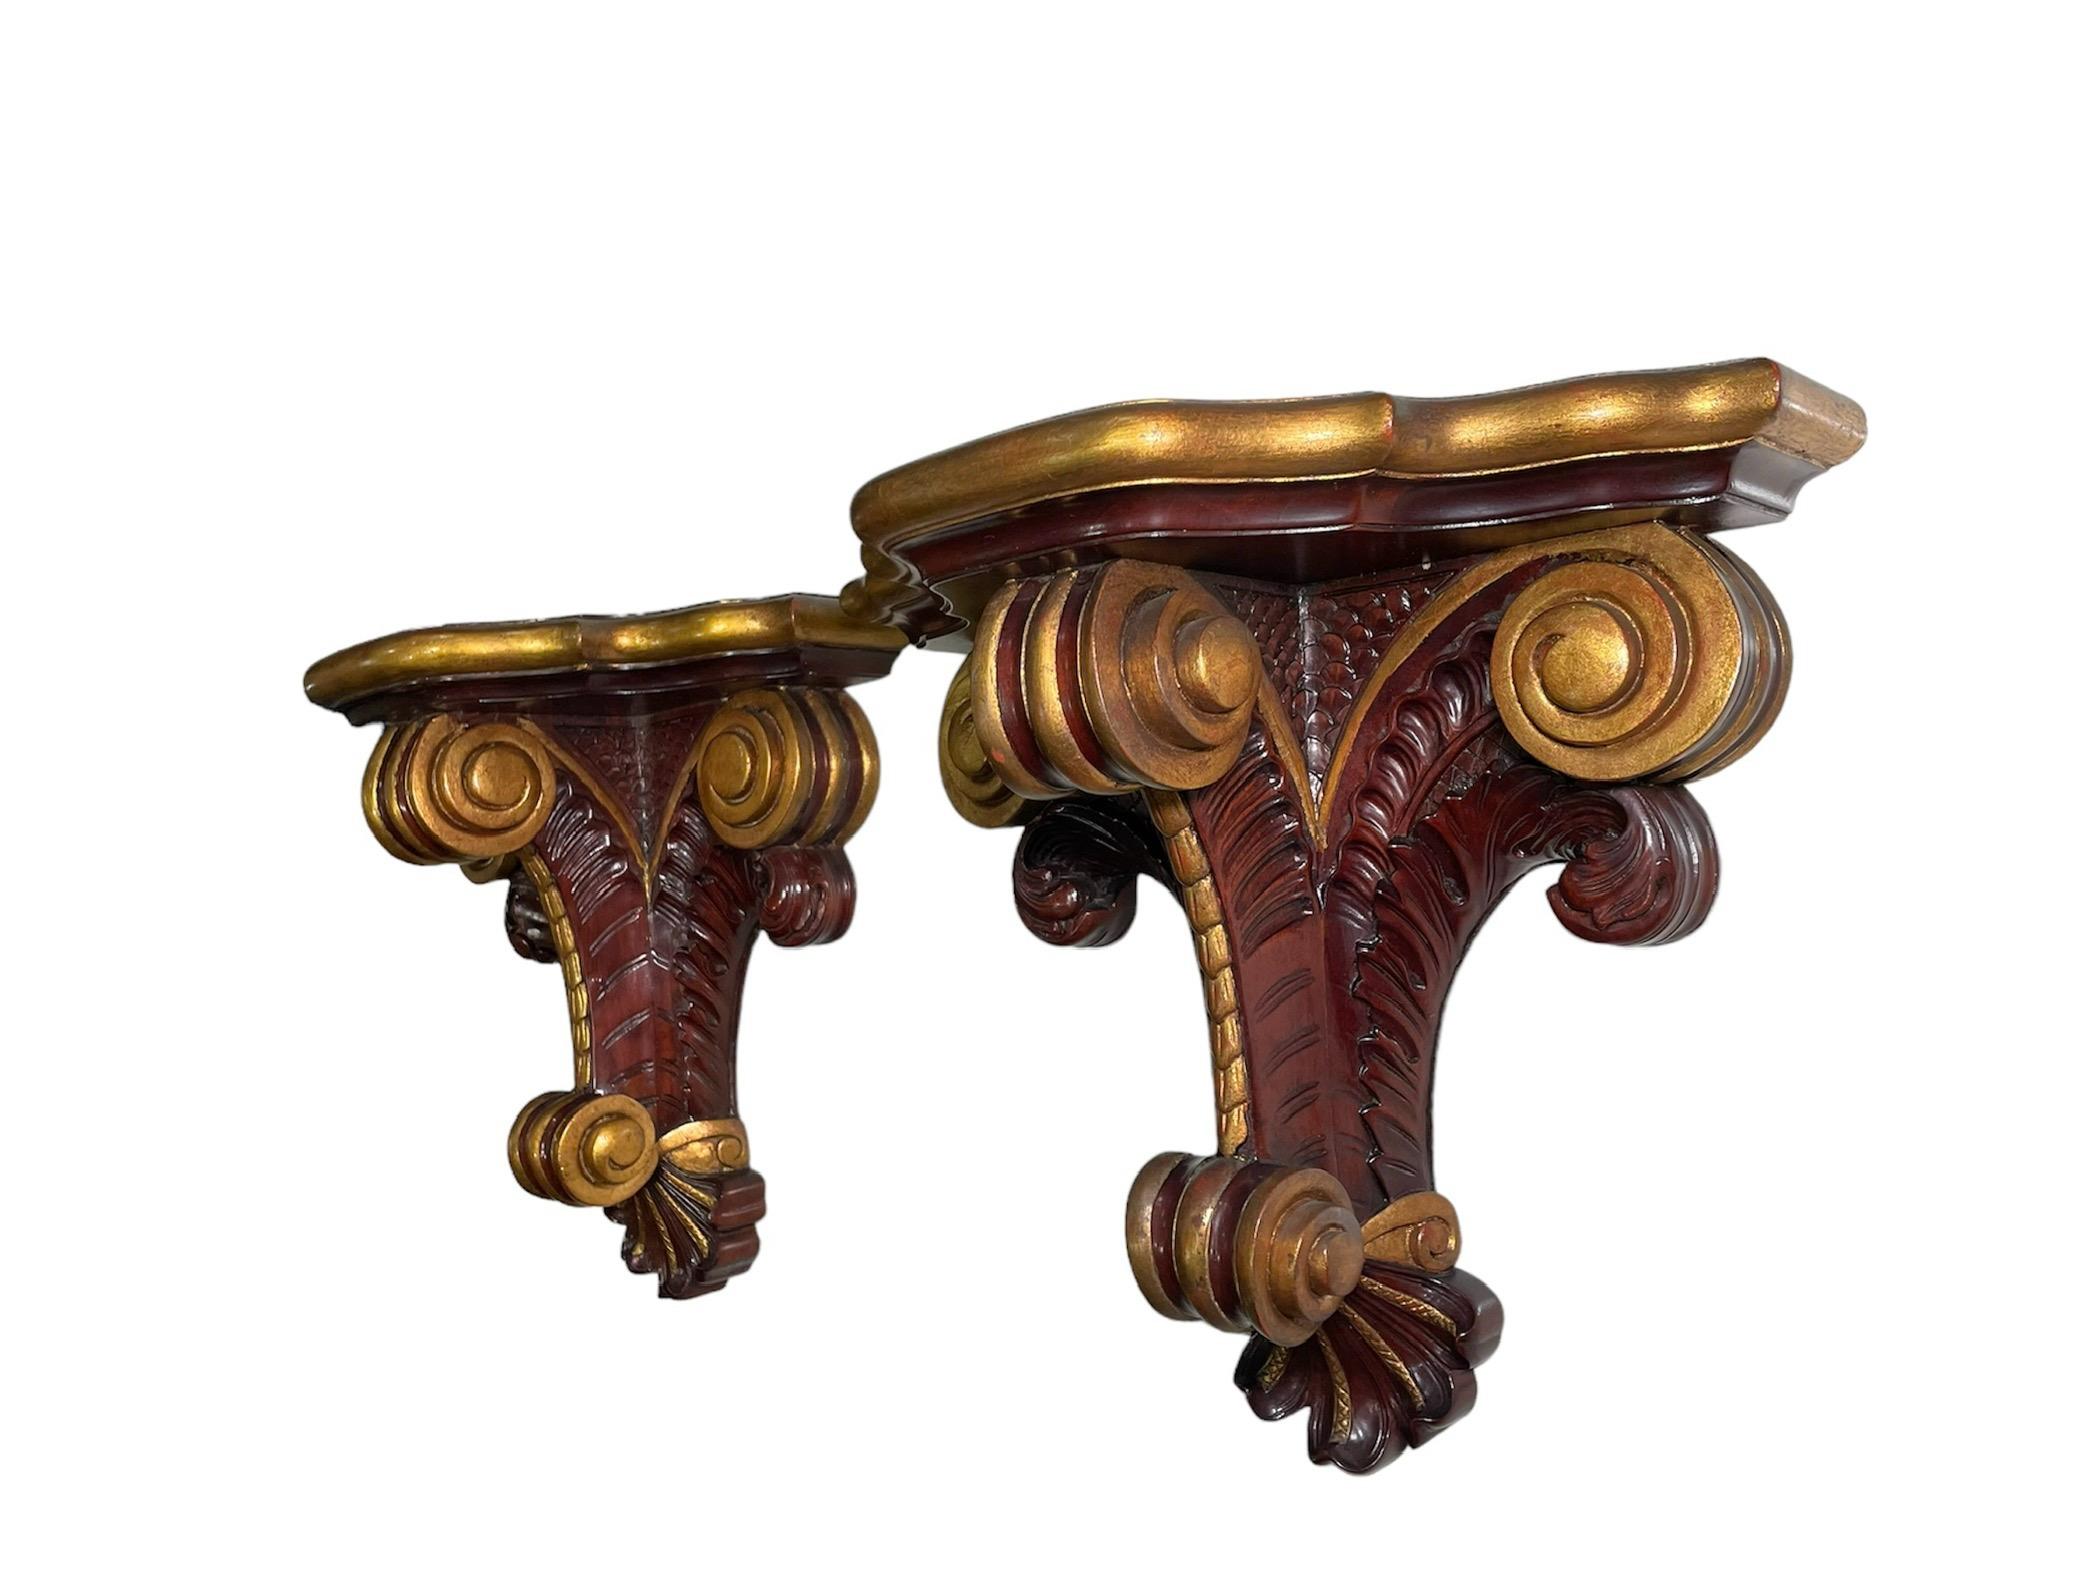 Rococo Revival Rococo Style Pair Of Gilt Dark Wood Brackets/Shelves  For Sale